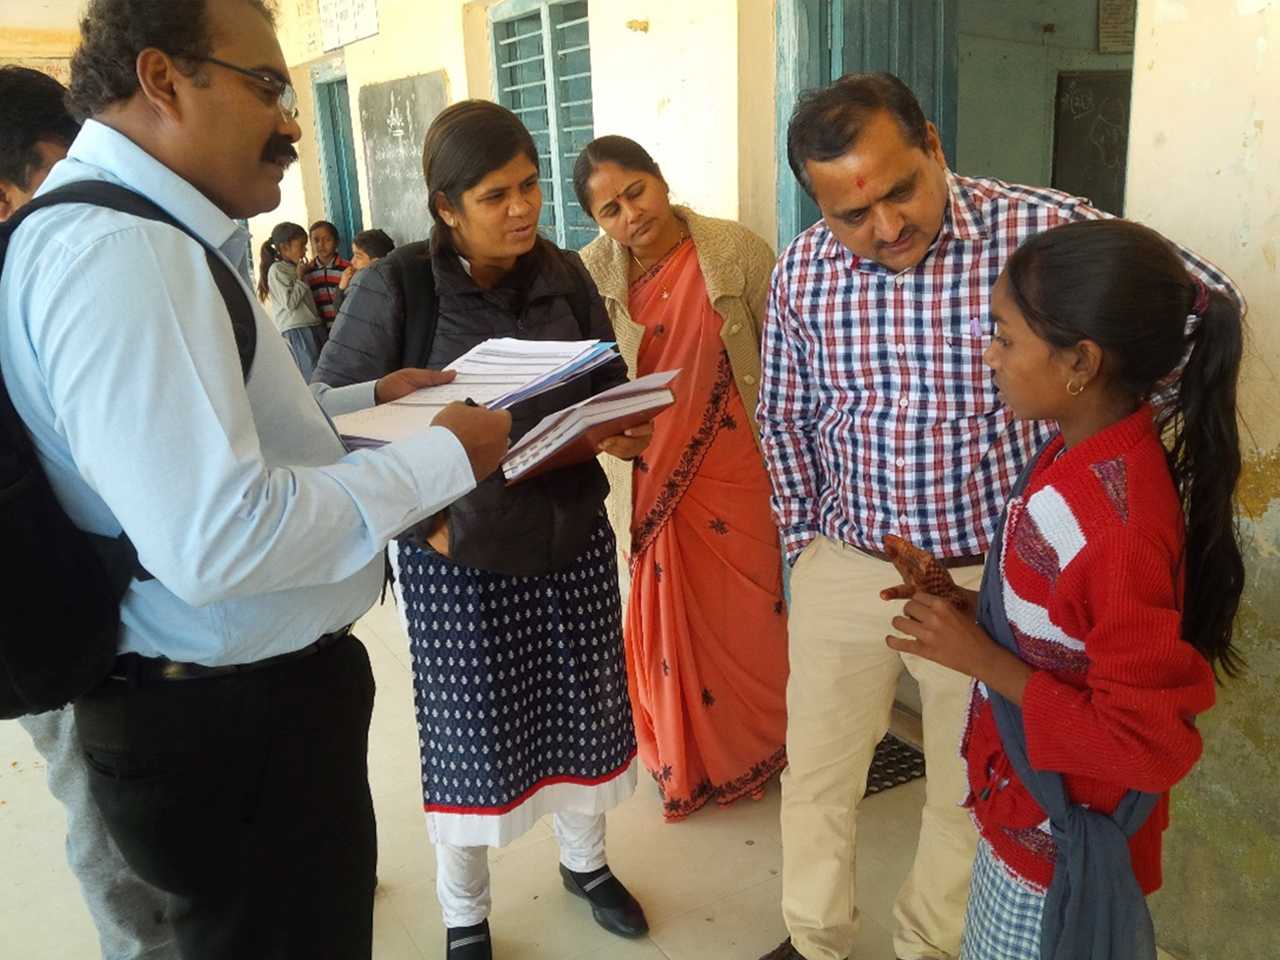 	An India EIS officer helps the district rapid response team take interviews after a food poisoning outbreak in Gujarat. Photo courtesy of Mayank Dwivedi.